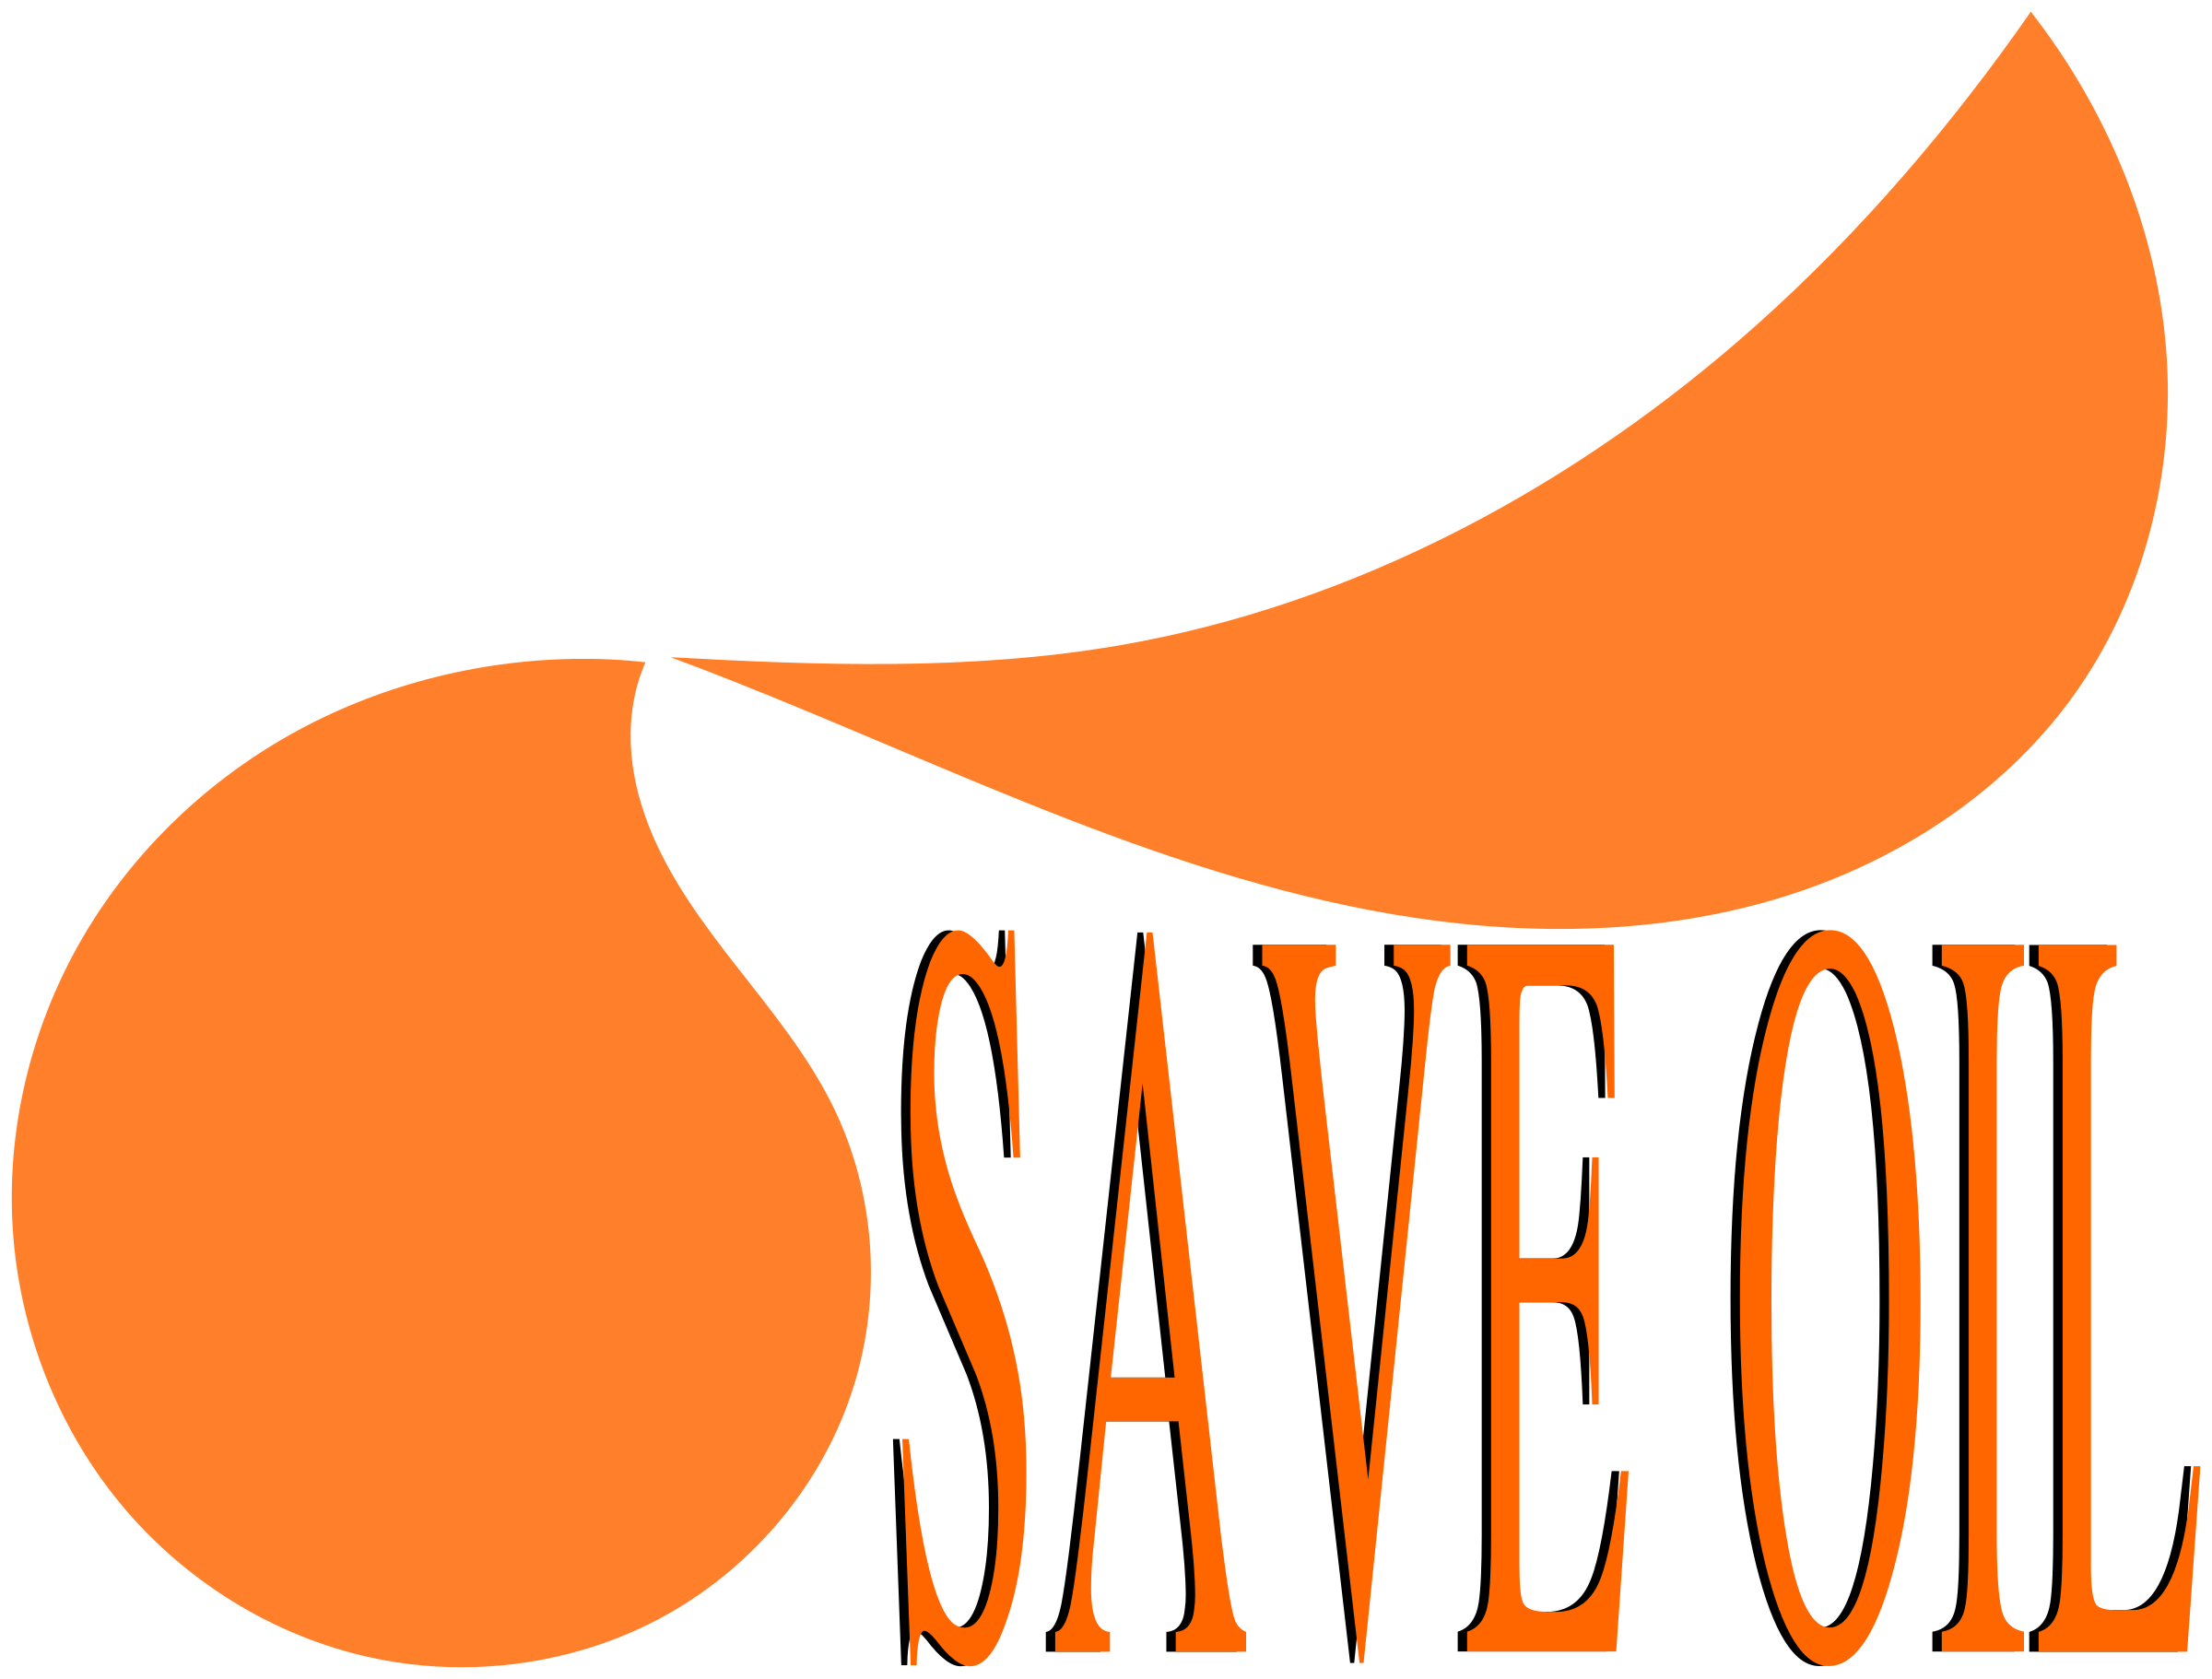 Save OIL - Message with logo SVG Clip arts